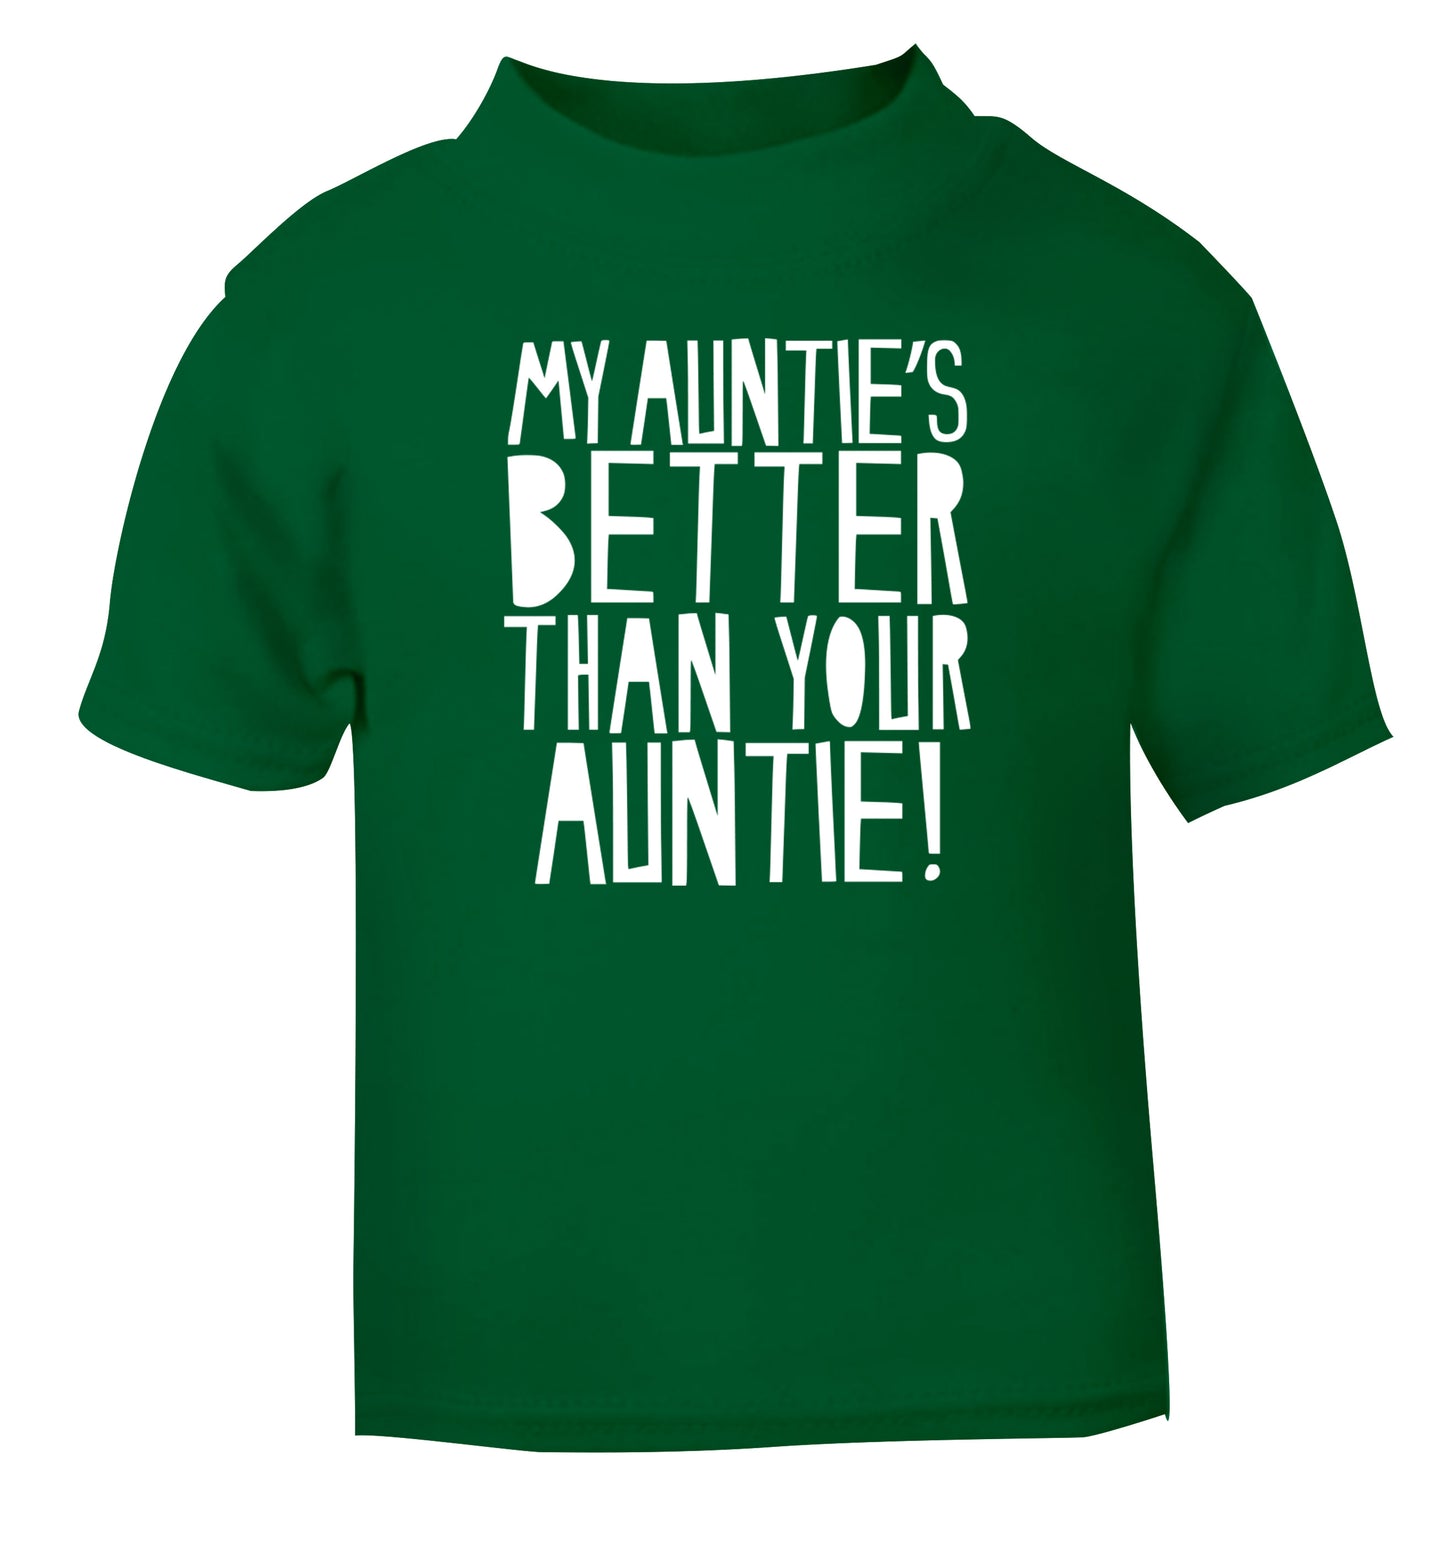 My auntie's better than your auntie green Baby Toddler Tshirt 2 Years